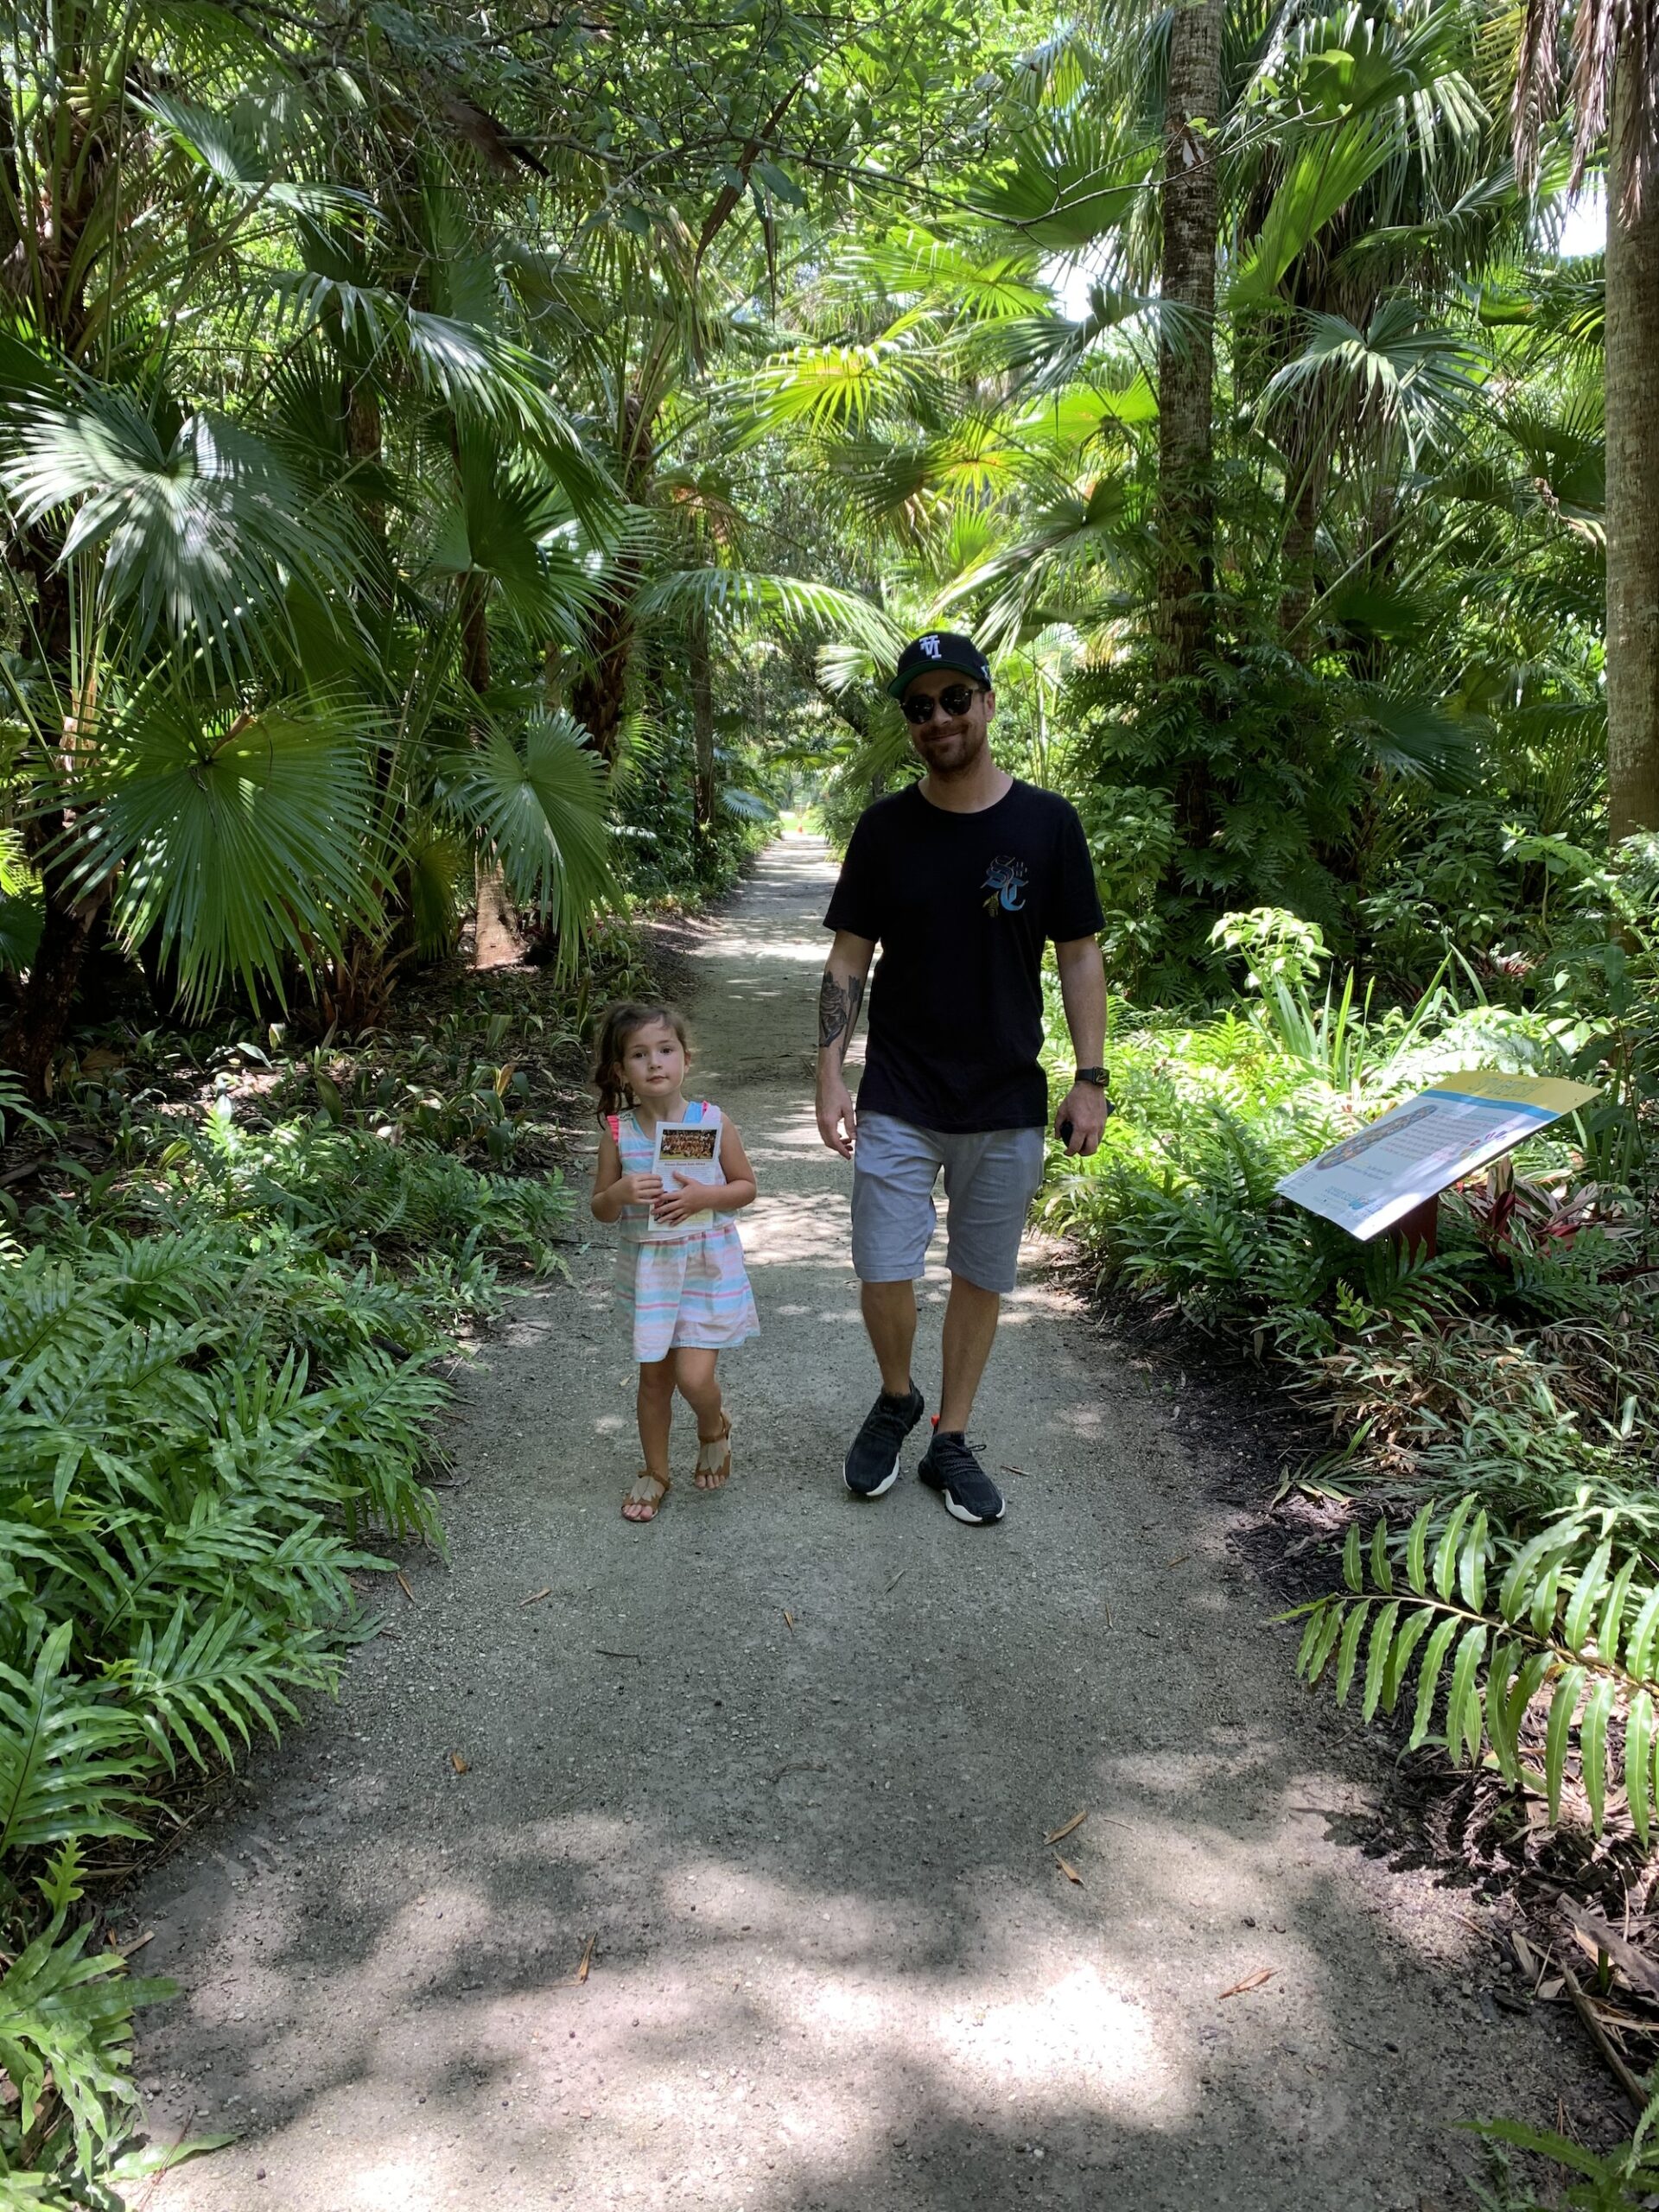 Featured image for “CELEBRATE FATHER’S DAY AT MCKEE BOTANICAL GARDEN: A DAY OF NATURE, FAMILY AND APPRECIATION”